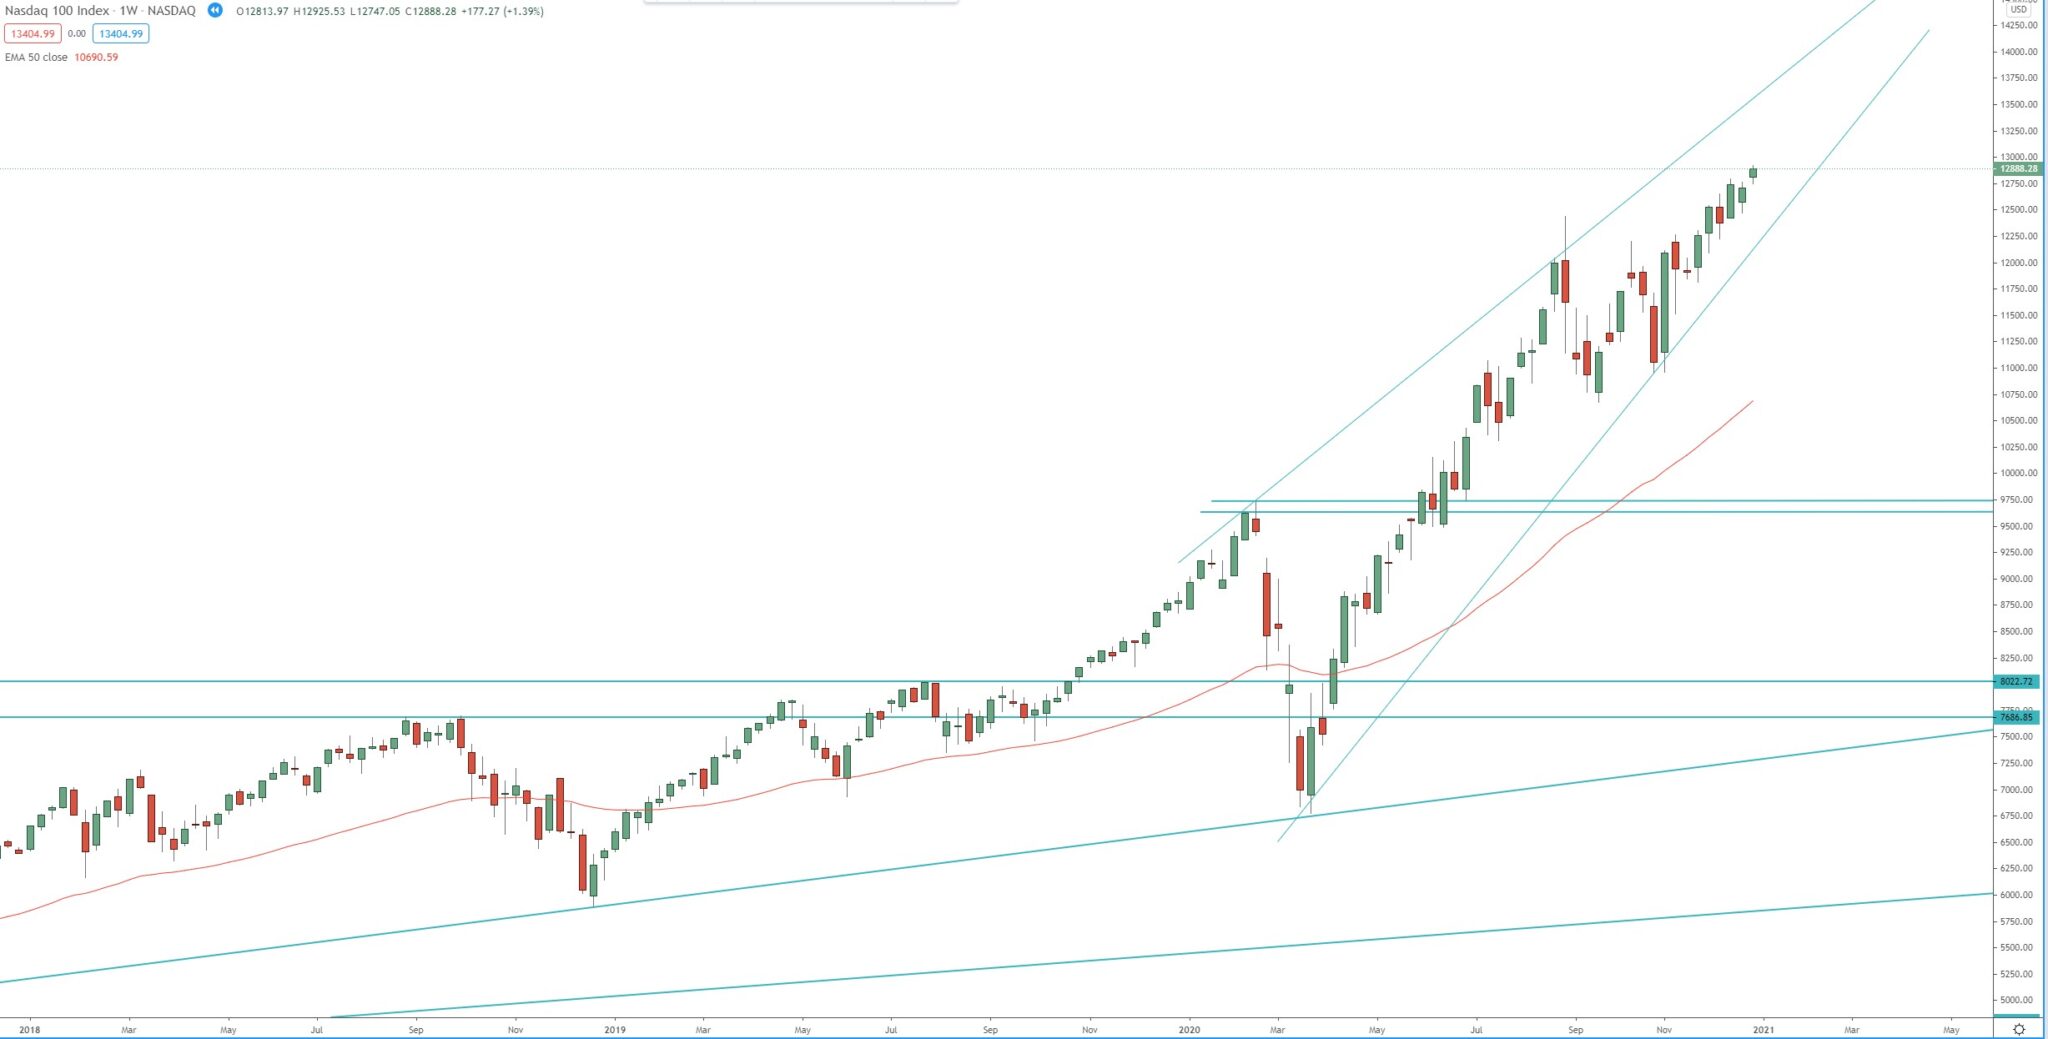 NASDAQ technical chart analysis, your guide to invest/trade the index